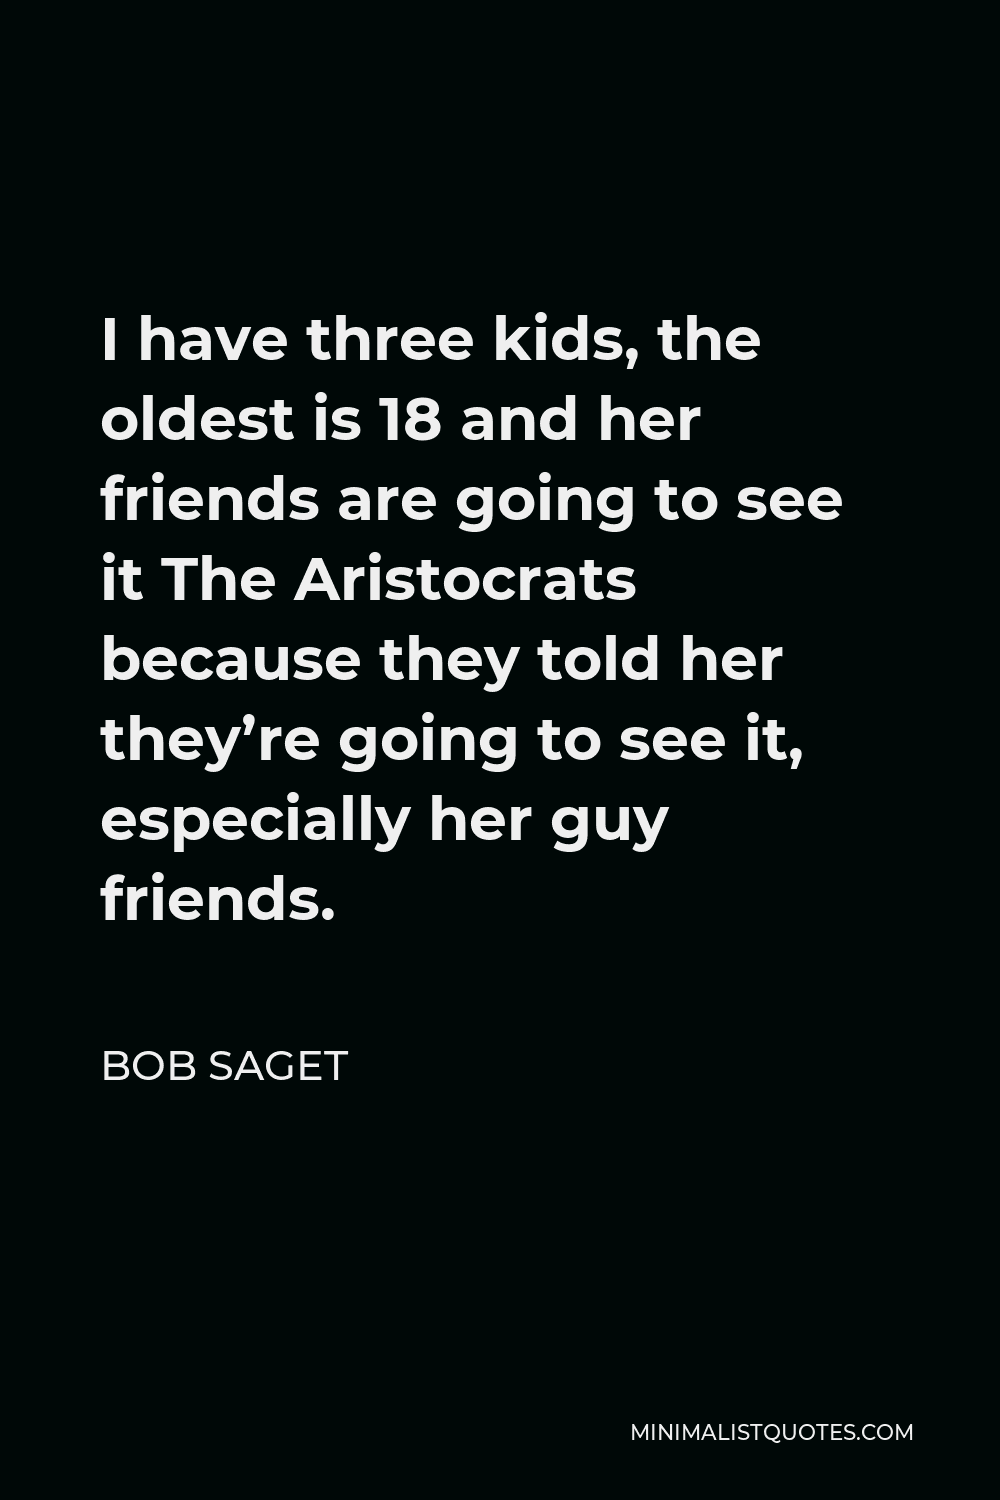 Bob Saget Quote - I have three kids, the oldest is 18 and her friends are going to see it The Aristocrats because they told her they’re going to see it, especially her guy friends.